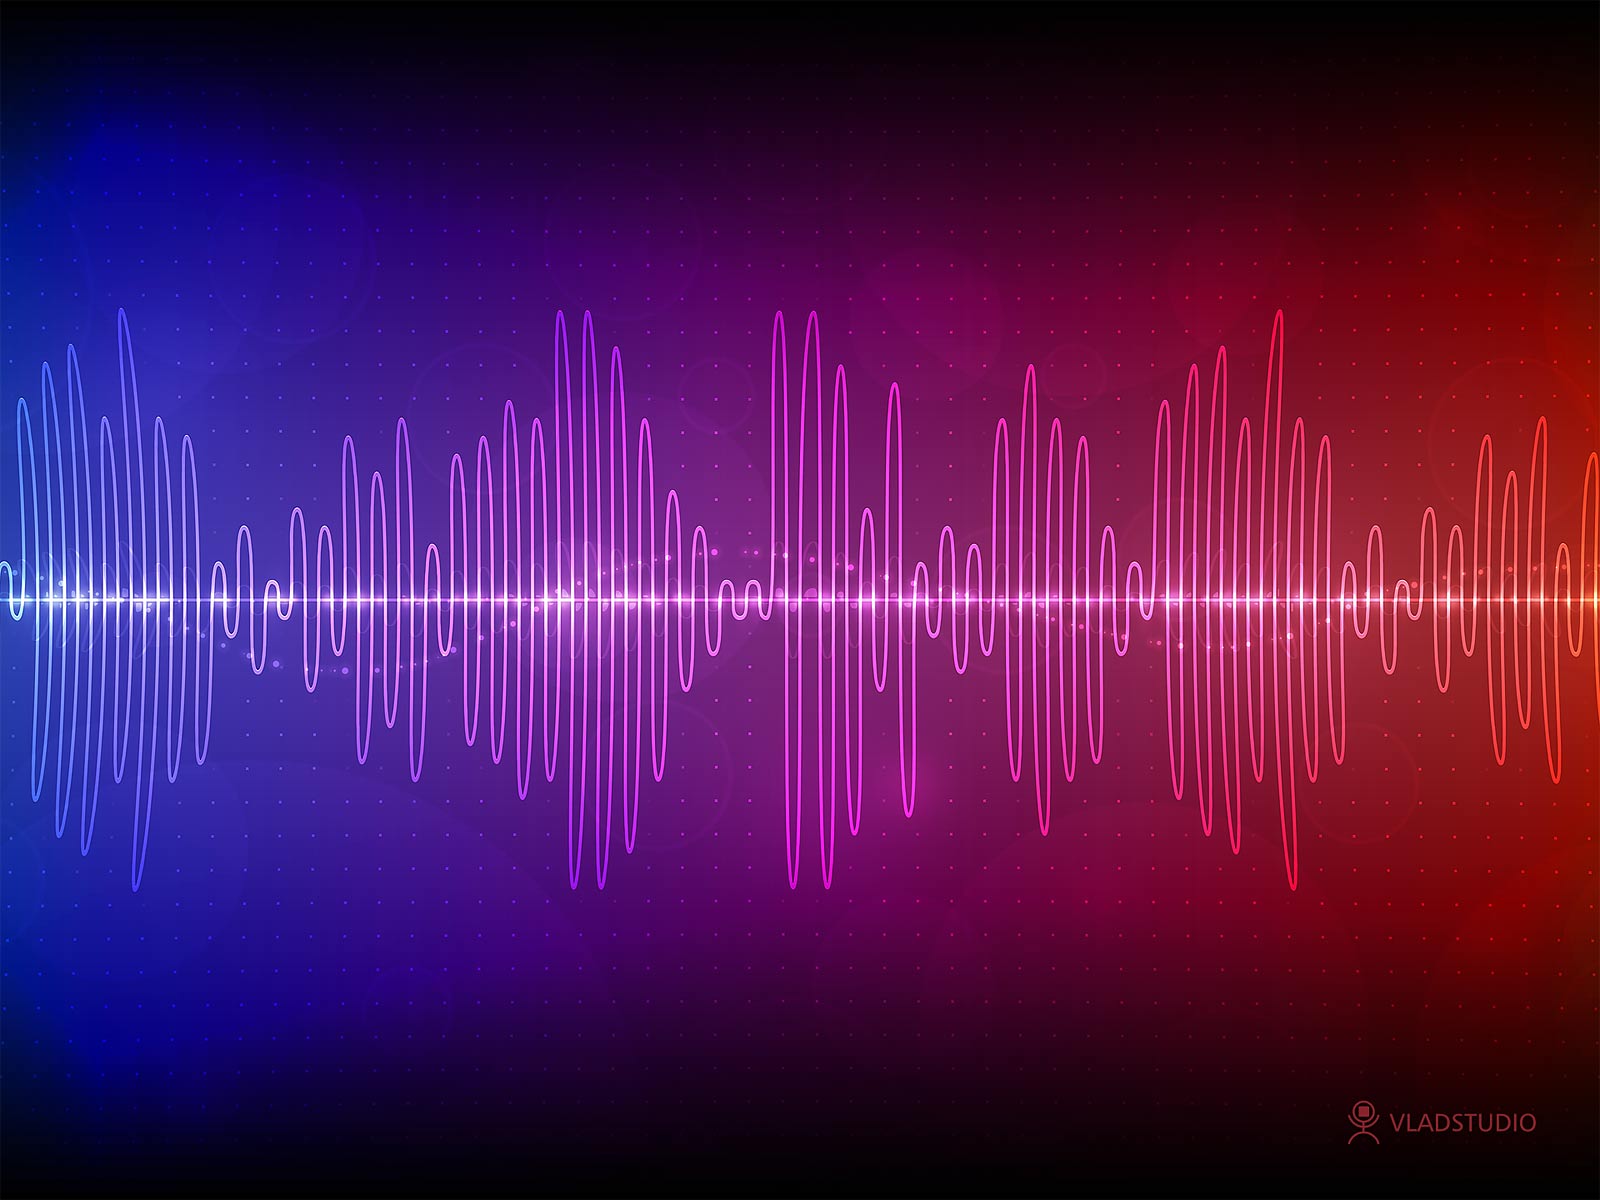 Sound Waves Wallpaper Images amp Pictures   Becuo